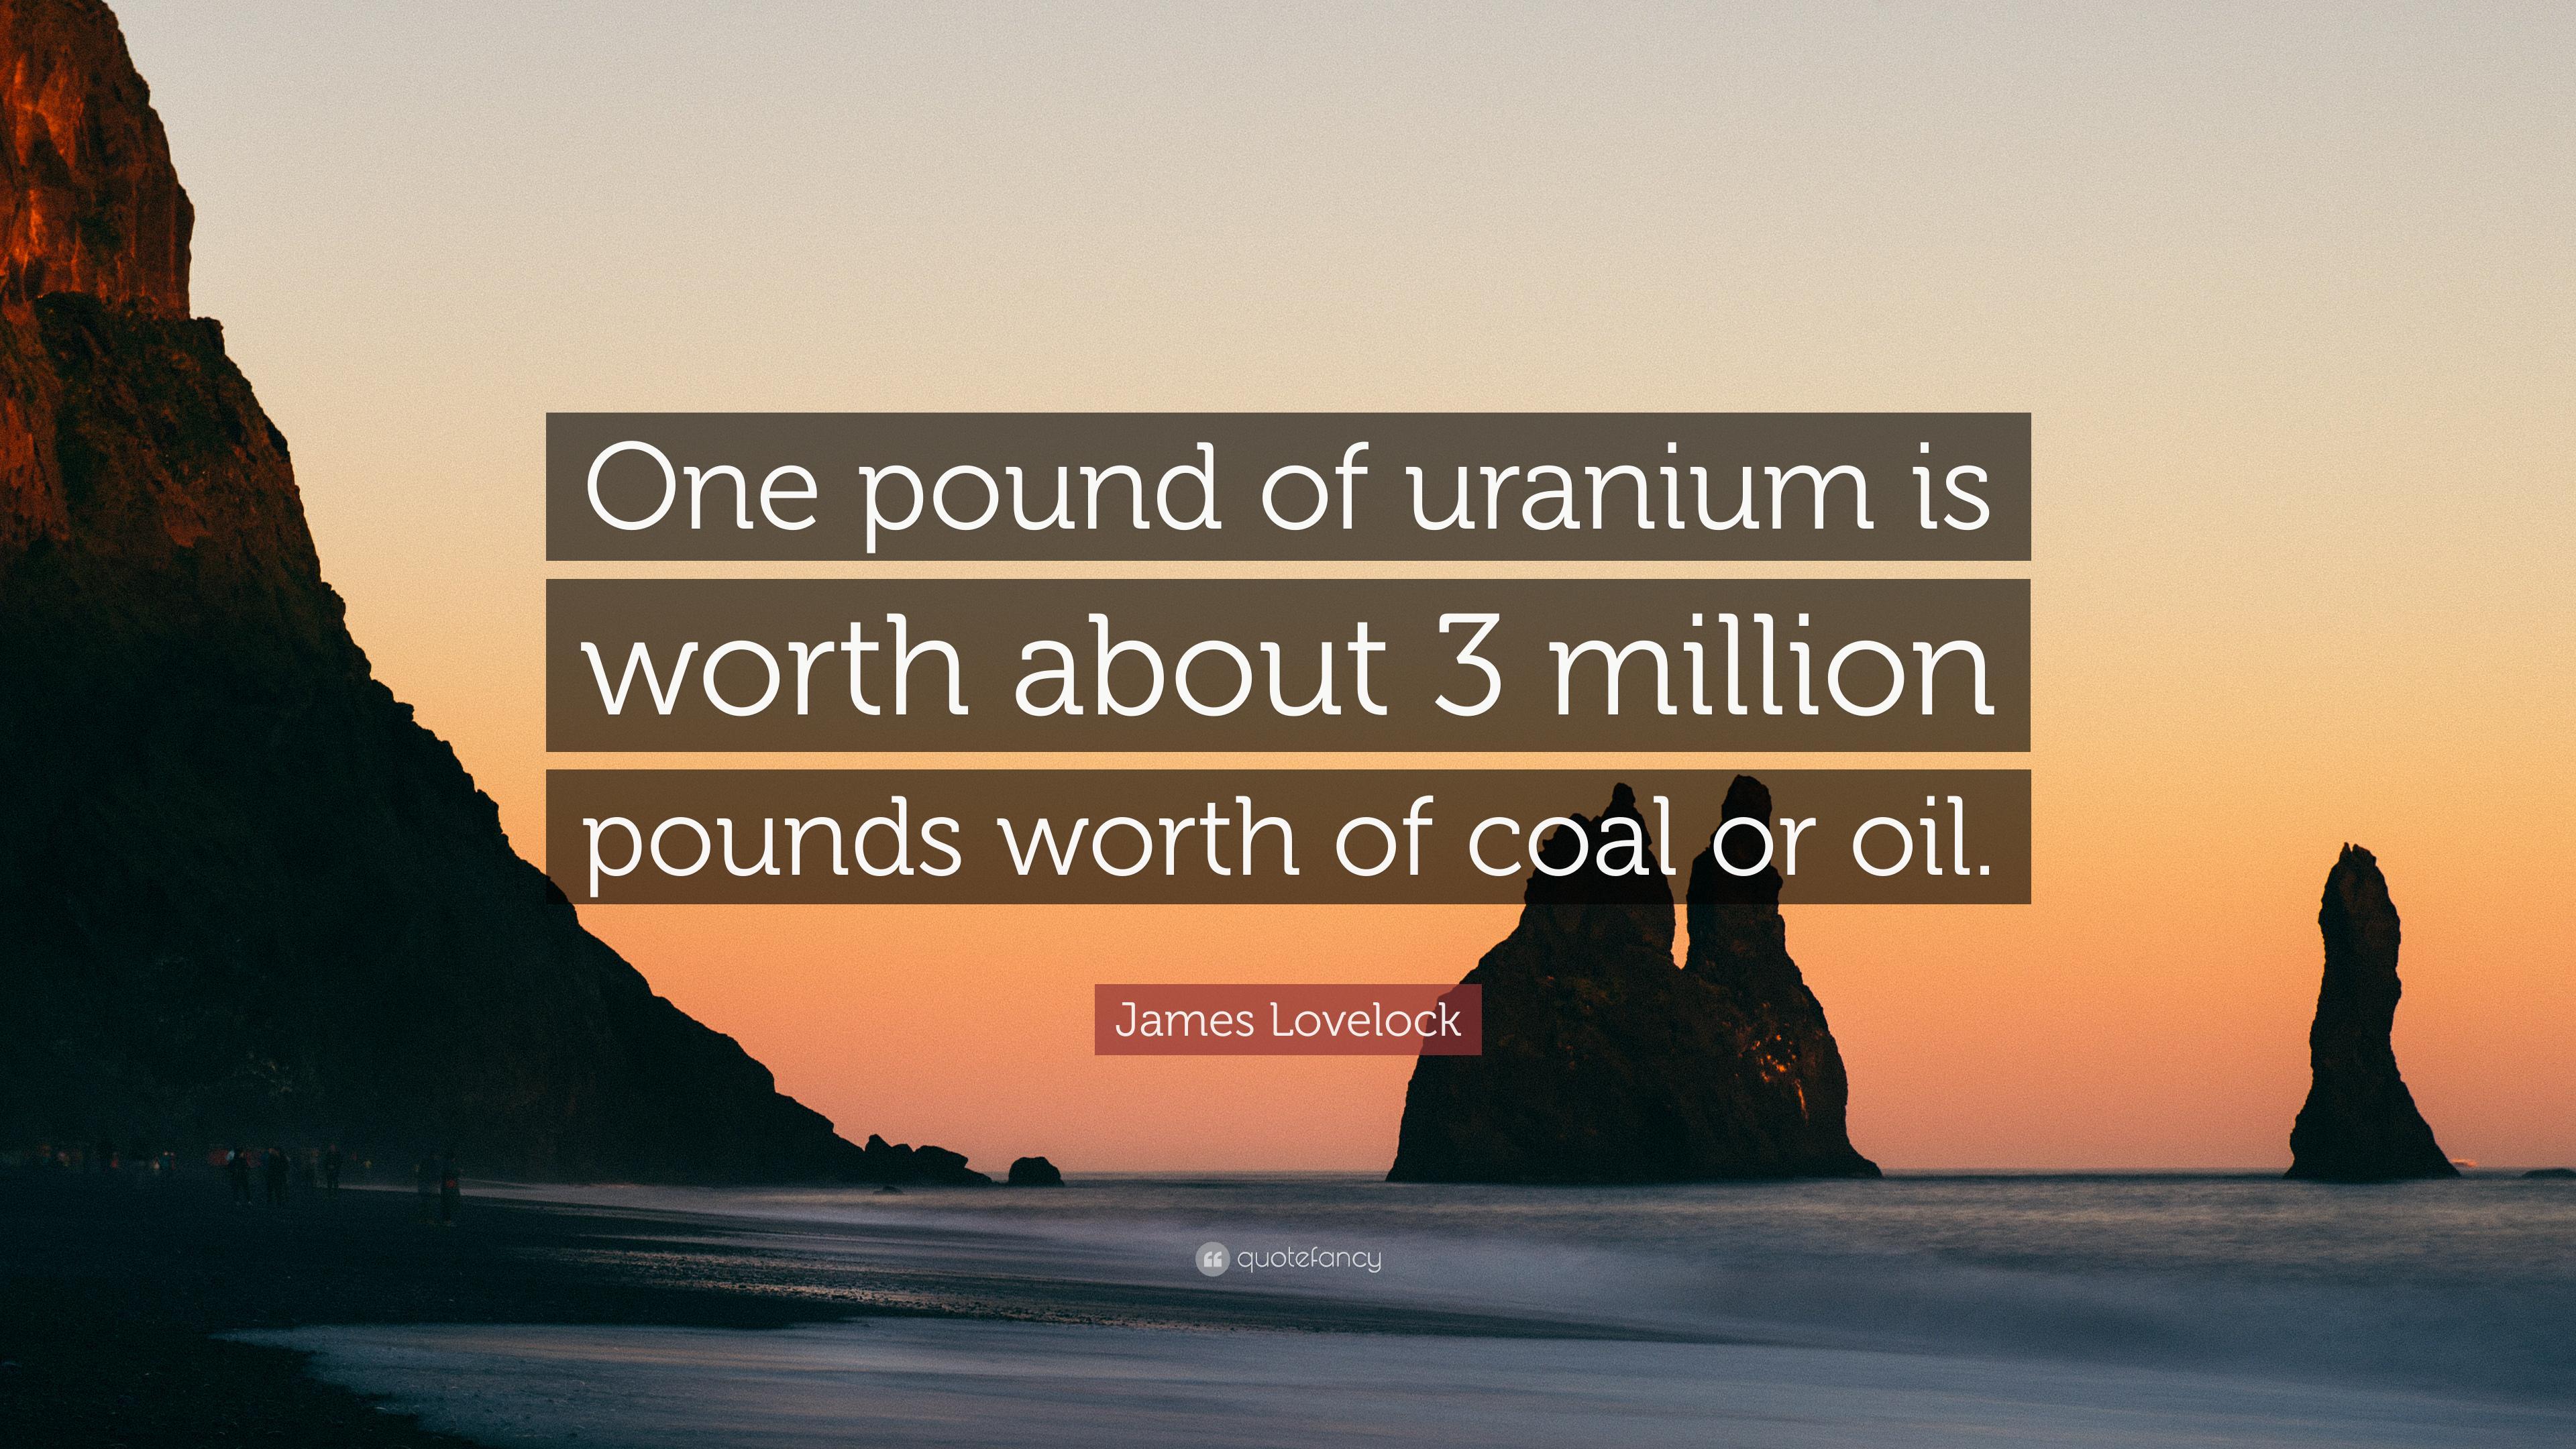 James Lovelock Quote: “One pound of uranium is worth about 3